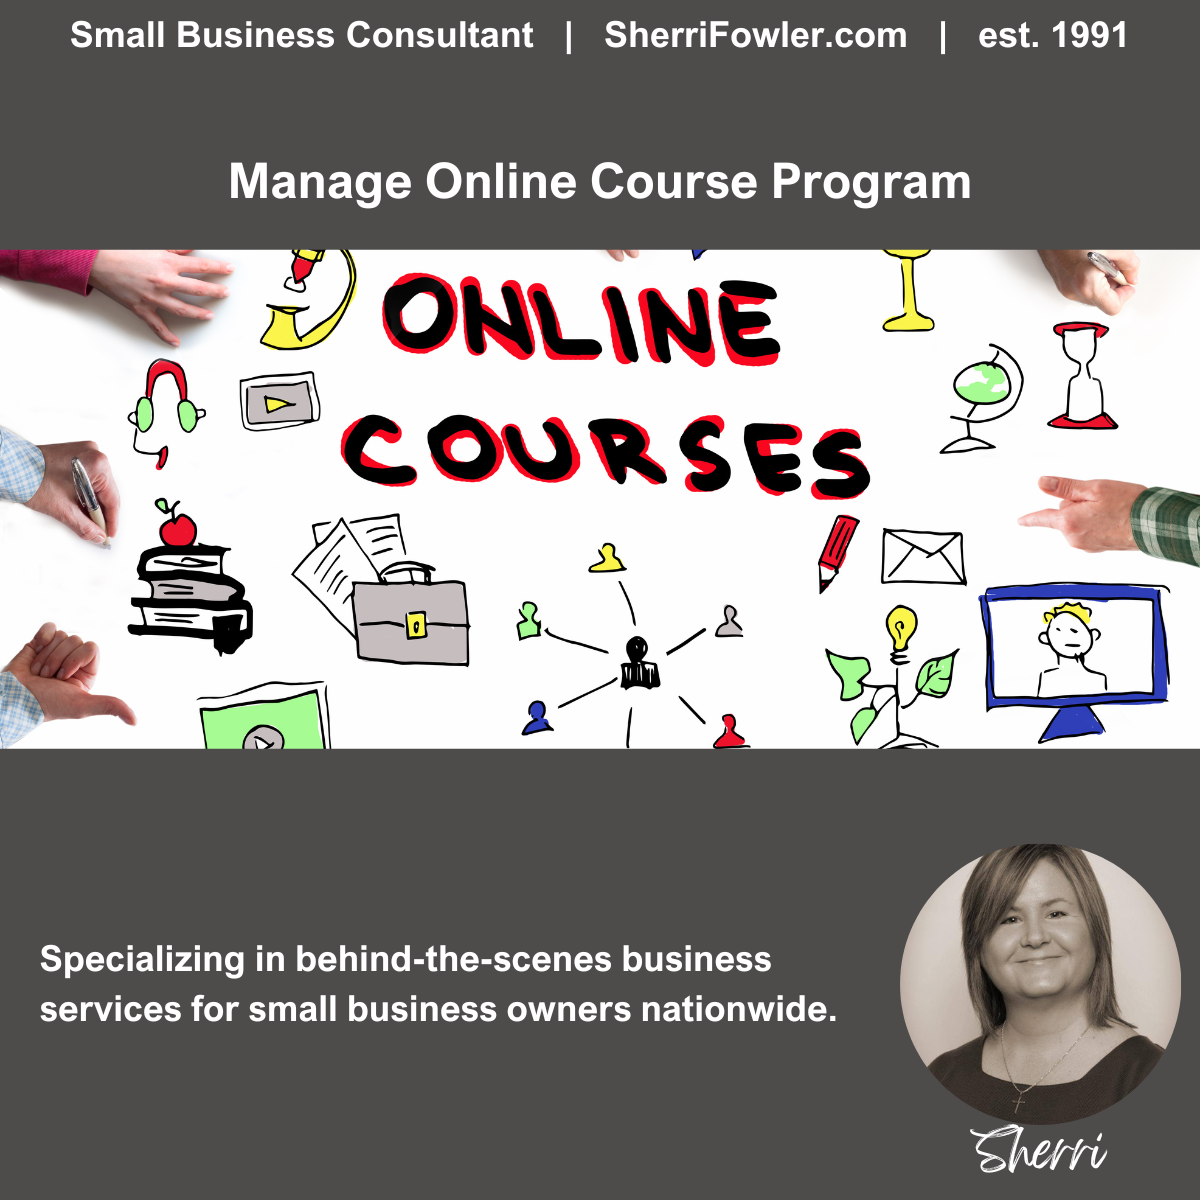 Online Course Program Management is available for small business owners and nonprofits at SherriFowler.com